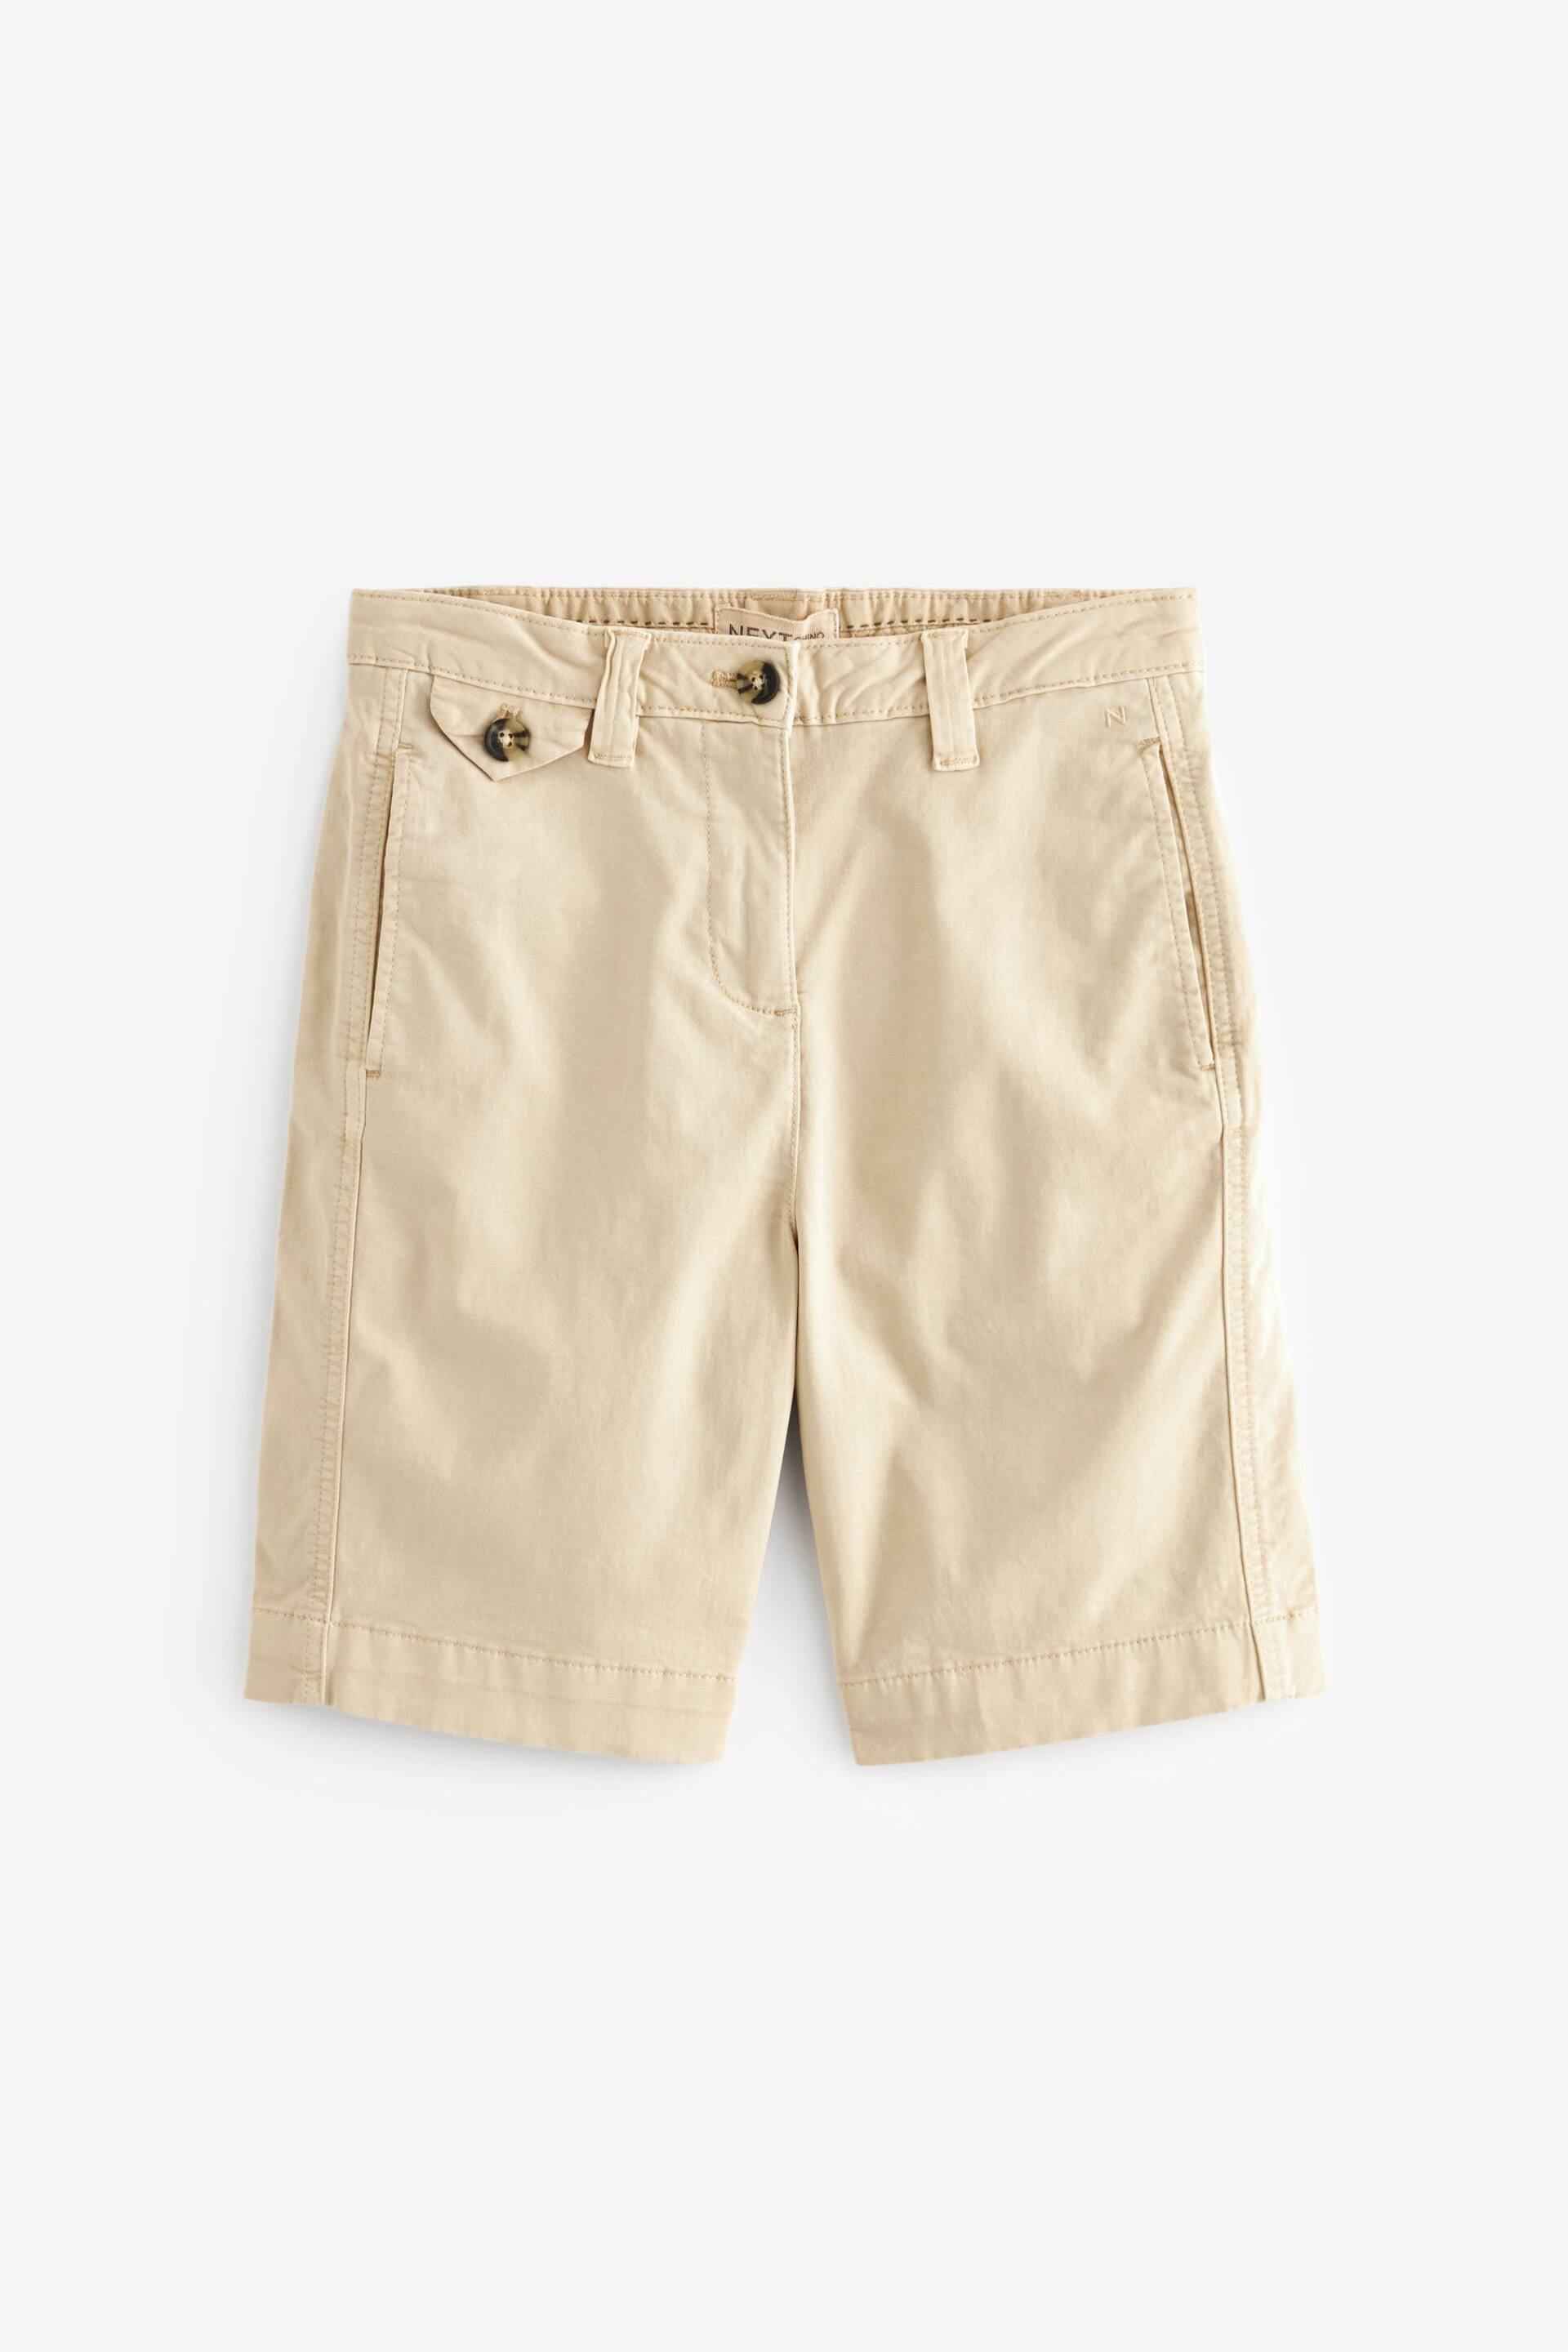 Neutral Chino Knee Length Shorts - Image 5 of 6